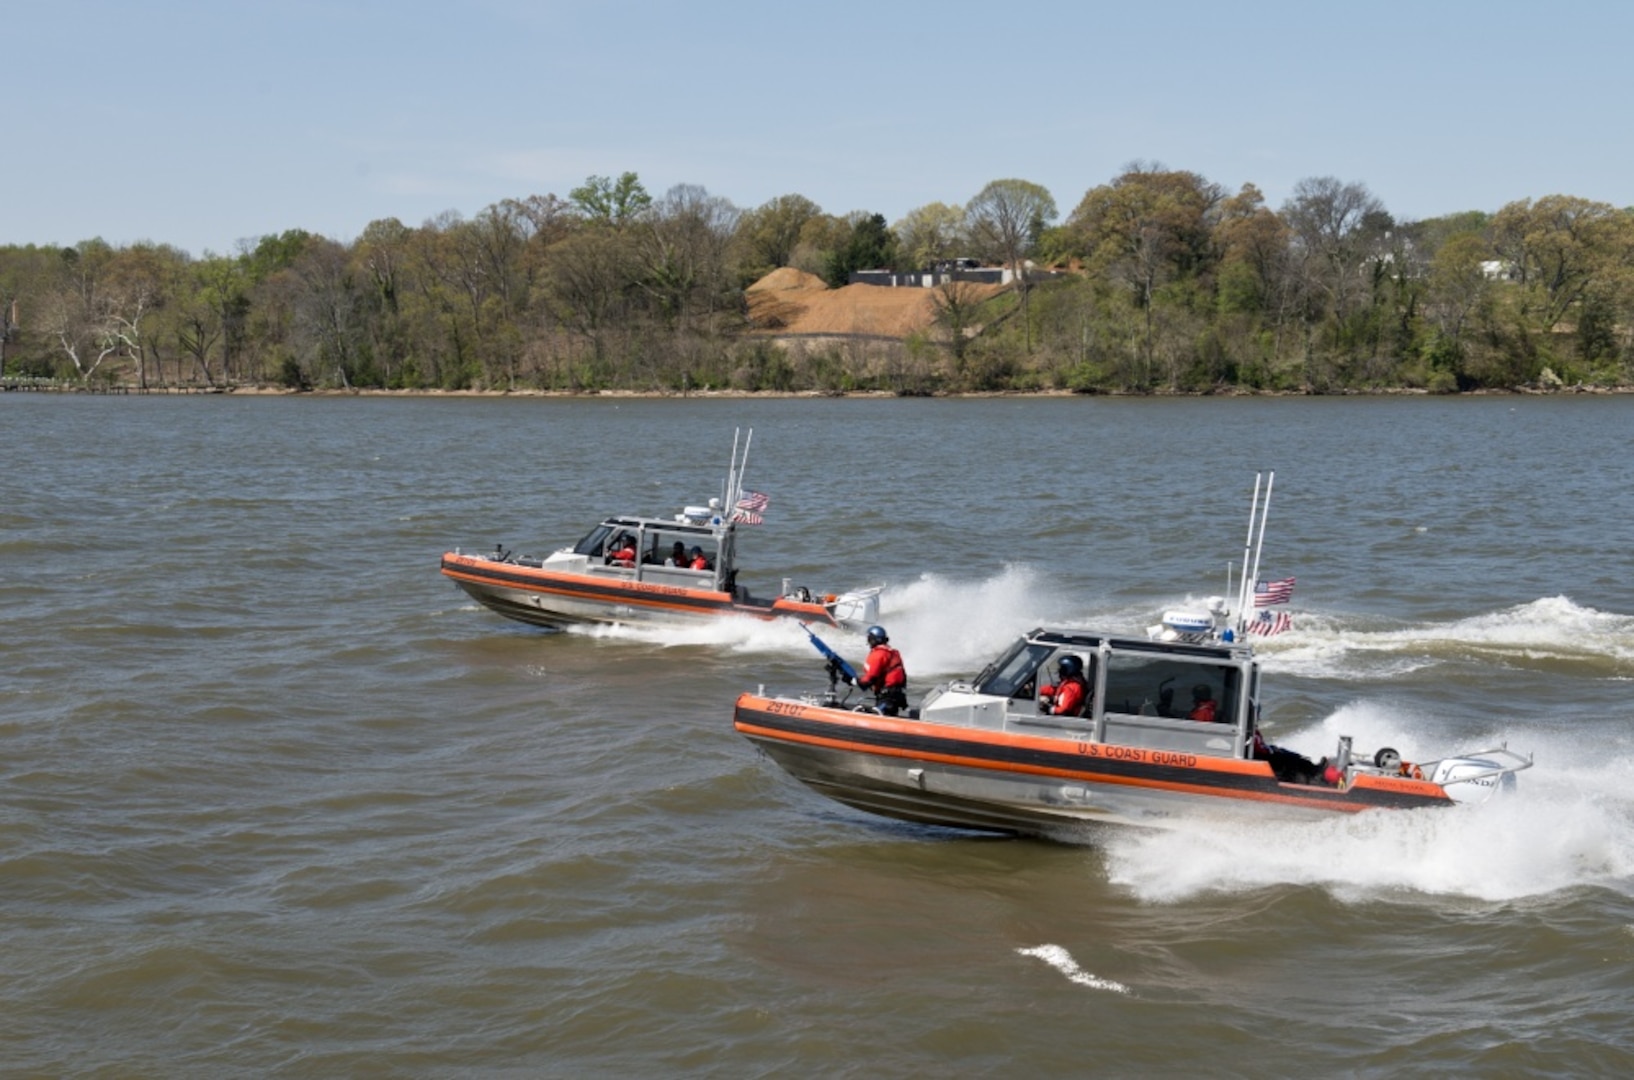 Boat crews from Coast Guard Station Washington aboard two 29-foot Response Boat-Smalls train in the Potomac River near Alexandria, Virginia, Thursday Apr. 6, 2016. Boat crews train to remain proficient in their skills and abilities. (U.S. Coast Guard photo by Petty Officer 3rd Class Jasmine Mieszala)